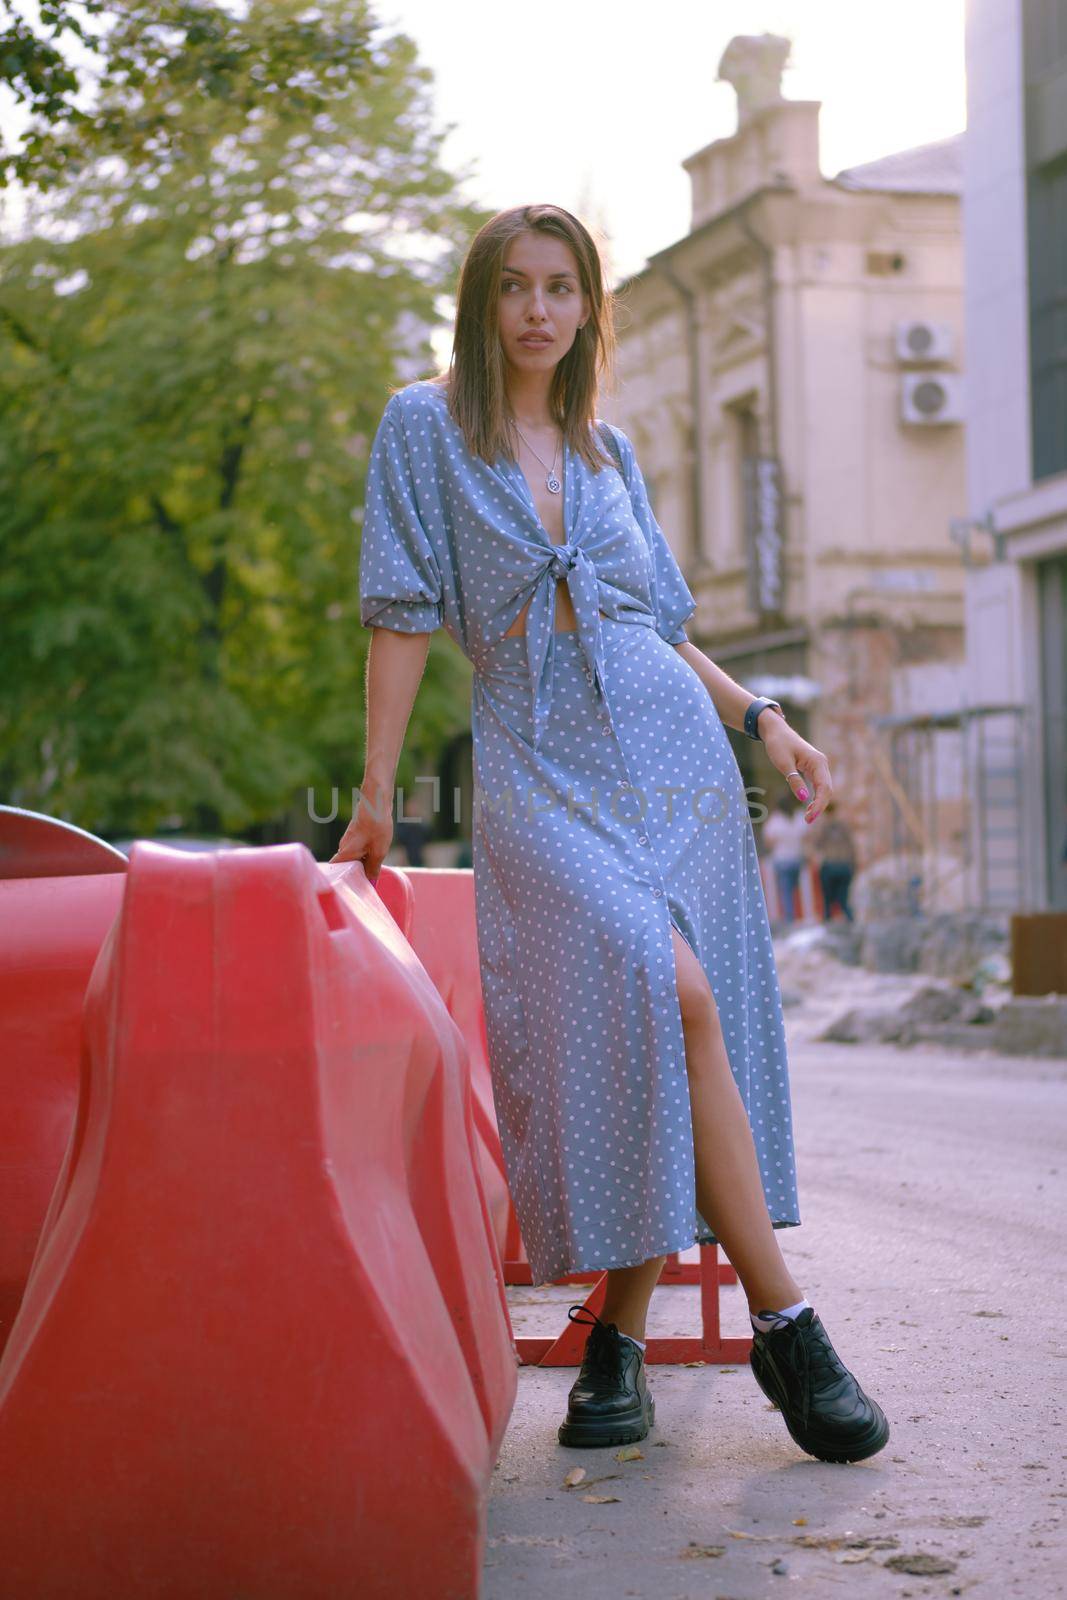 Cute blonde female in a long blue dress with polka-dots, black boots, watch, with a pendant around her neck and a small handbag on her shoulder is posing leaning a red guardrail while walking alone in the city. The concept of fashion and style. Full length shot.